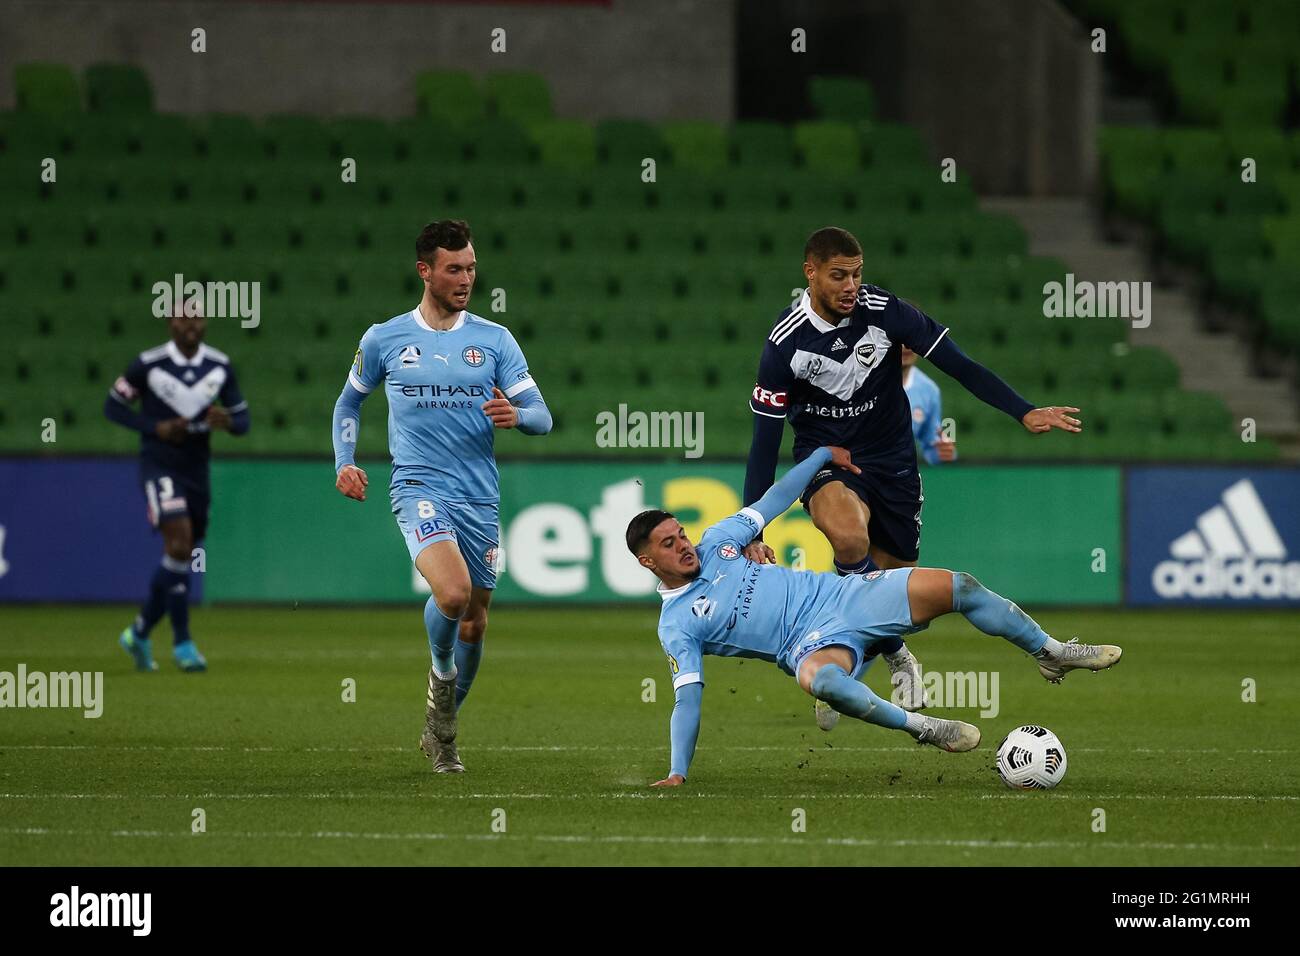 Melbourne, Australia, 6 June, 2021. Marco Tilio of Melbourne City trips as he kicks the ball during Round 24 of the Melbourne Victory v Melbourne City FC A-League match, Australia. Credit: Dave Hewison/Alamy Live News Stock Photo